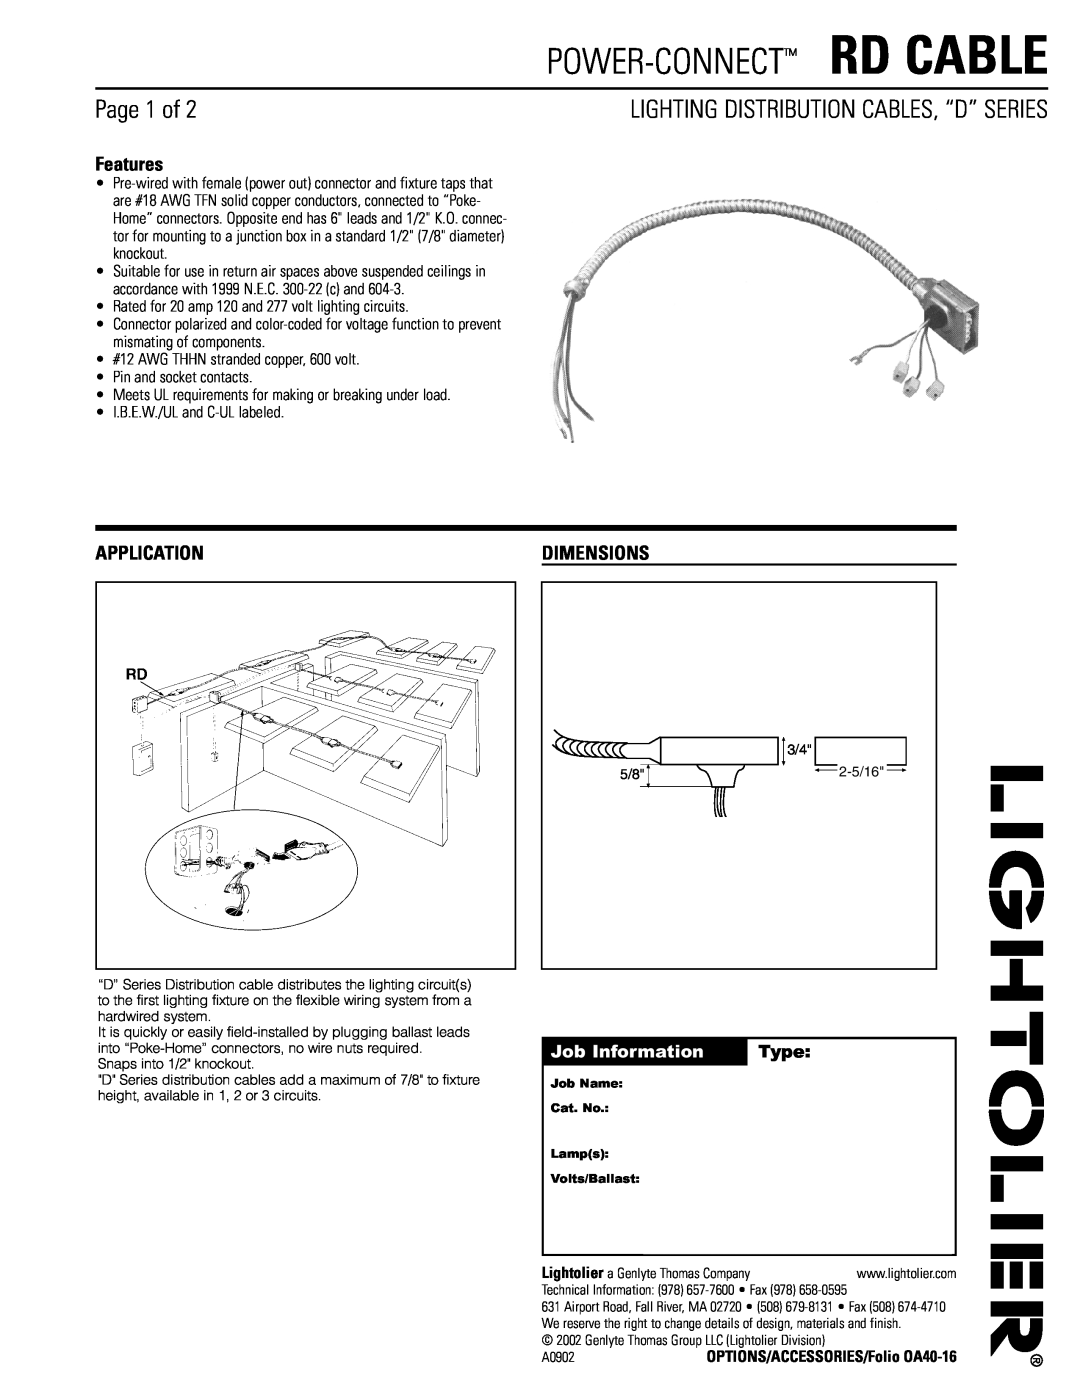 Lightolier RD Cable dimensions Page 1 of, Features, Application, Dimensions, Job Information, Type, Power-Connect Rd Cable 